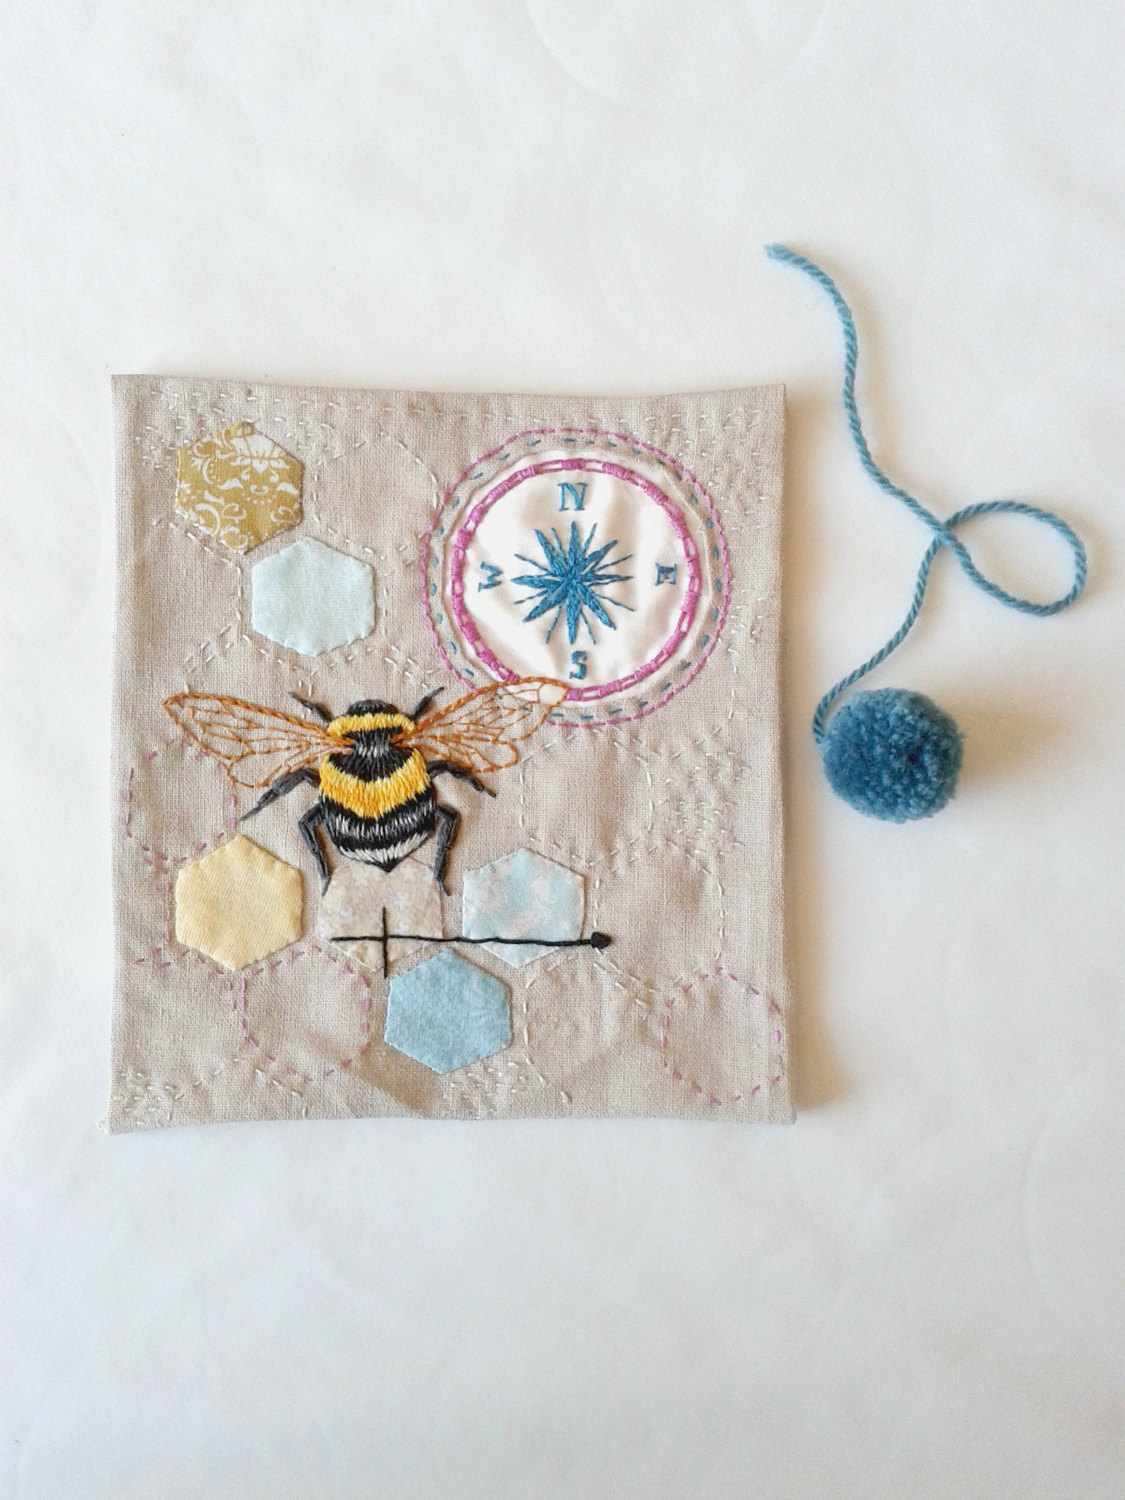 Bumble Bee Embroidery Pattern Bee Embroidery Pattern Pdf Queen Bee Printable Pattern Bumble Bee Entomology Hand Embroidery Diy Hoop Art Diy Wall Art Diy Craft